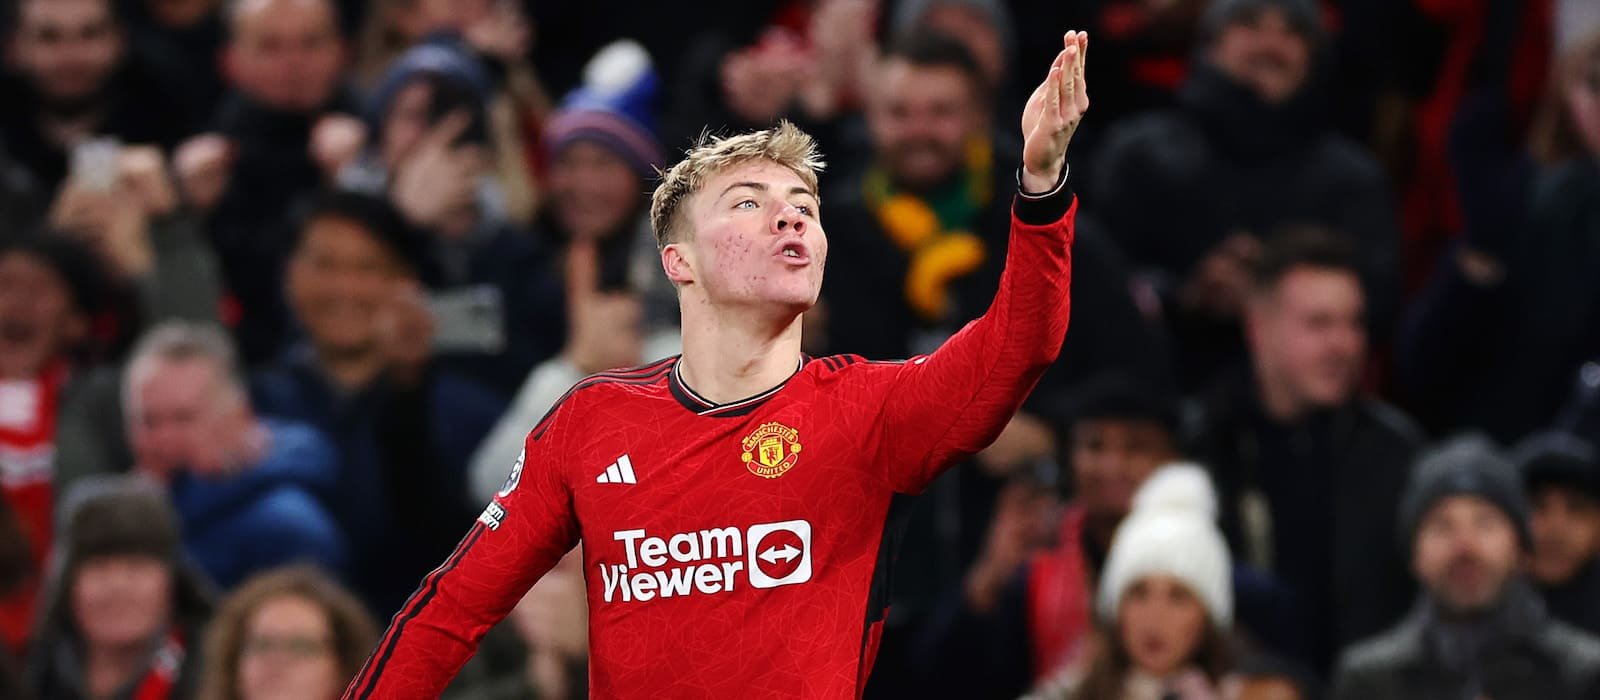 “I’m not so sure right now”: Dwight Yorke questions Rasmus Hojlund’s credentials to become Man United’s long-term striker – Man United News And Transfer News